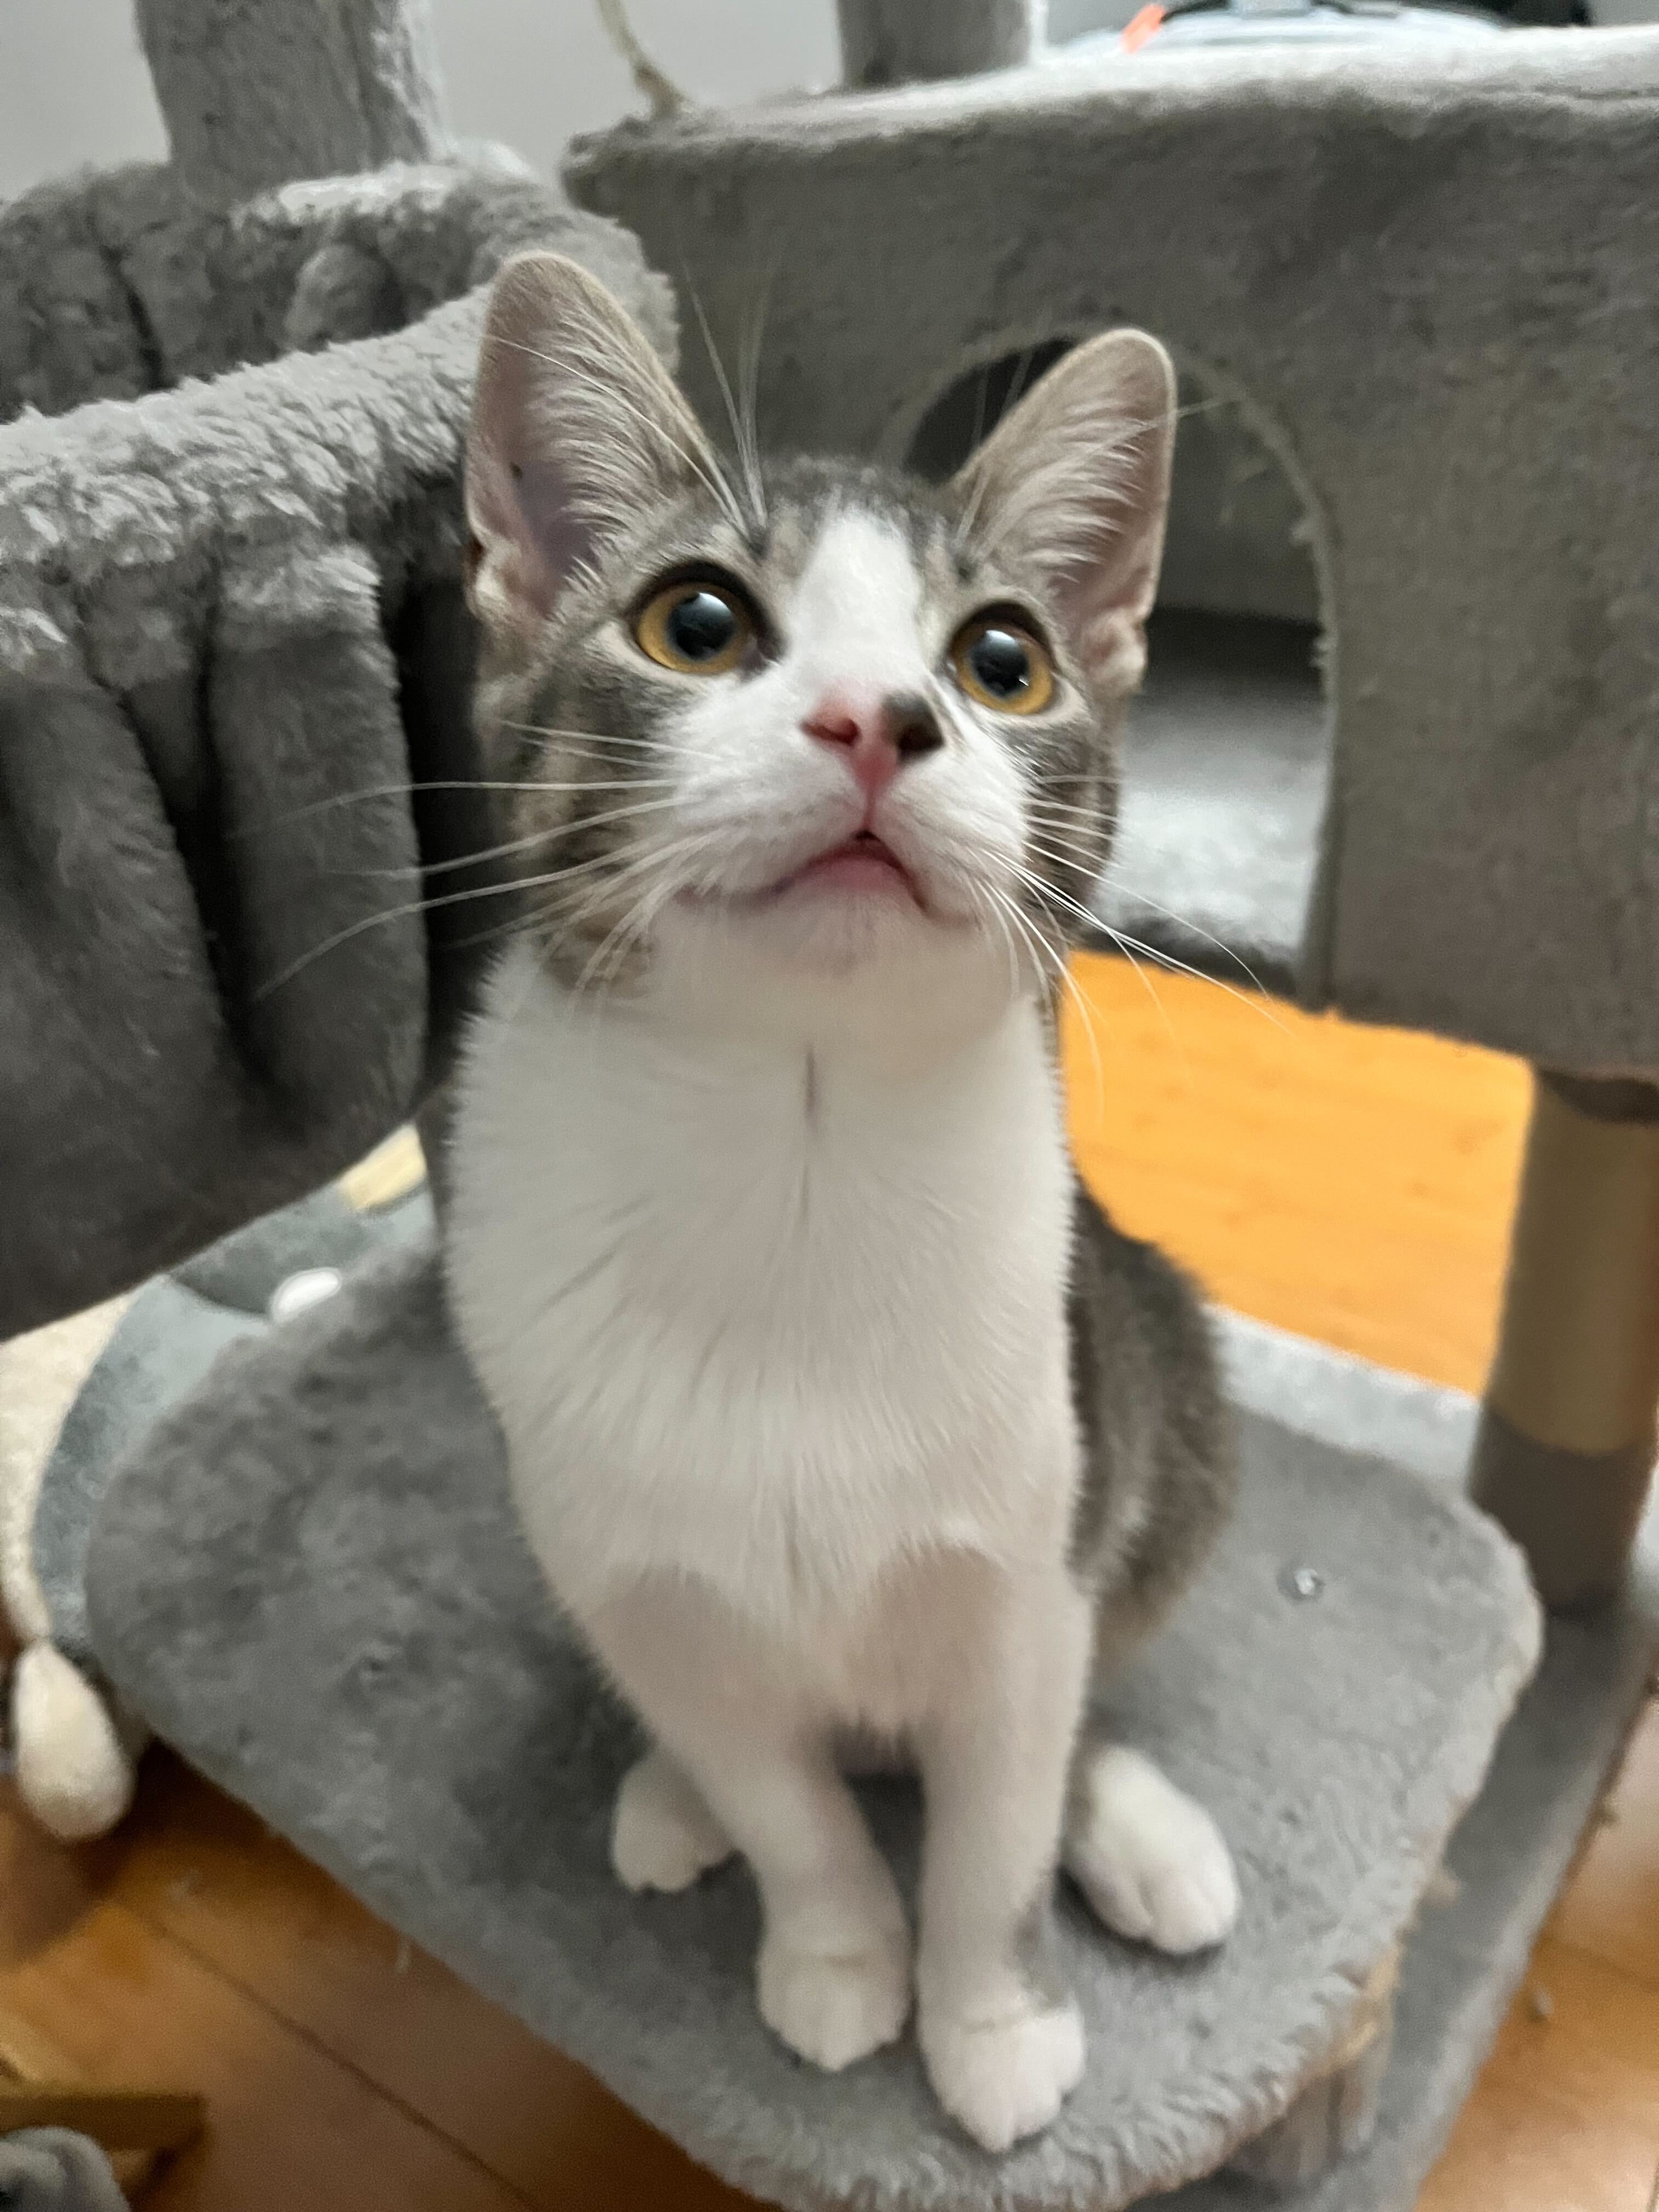 cute little grey and white cat with dot on its nose sits on a cat tree looking up at the camera